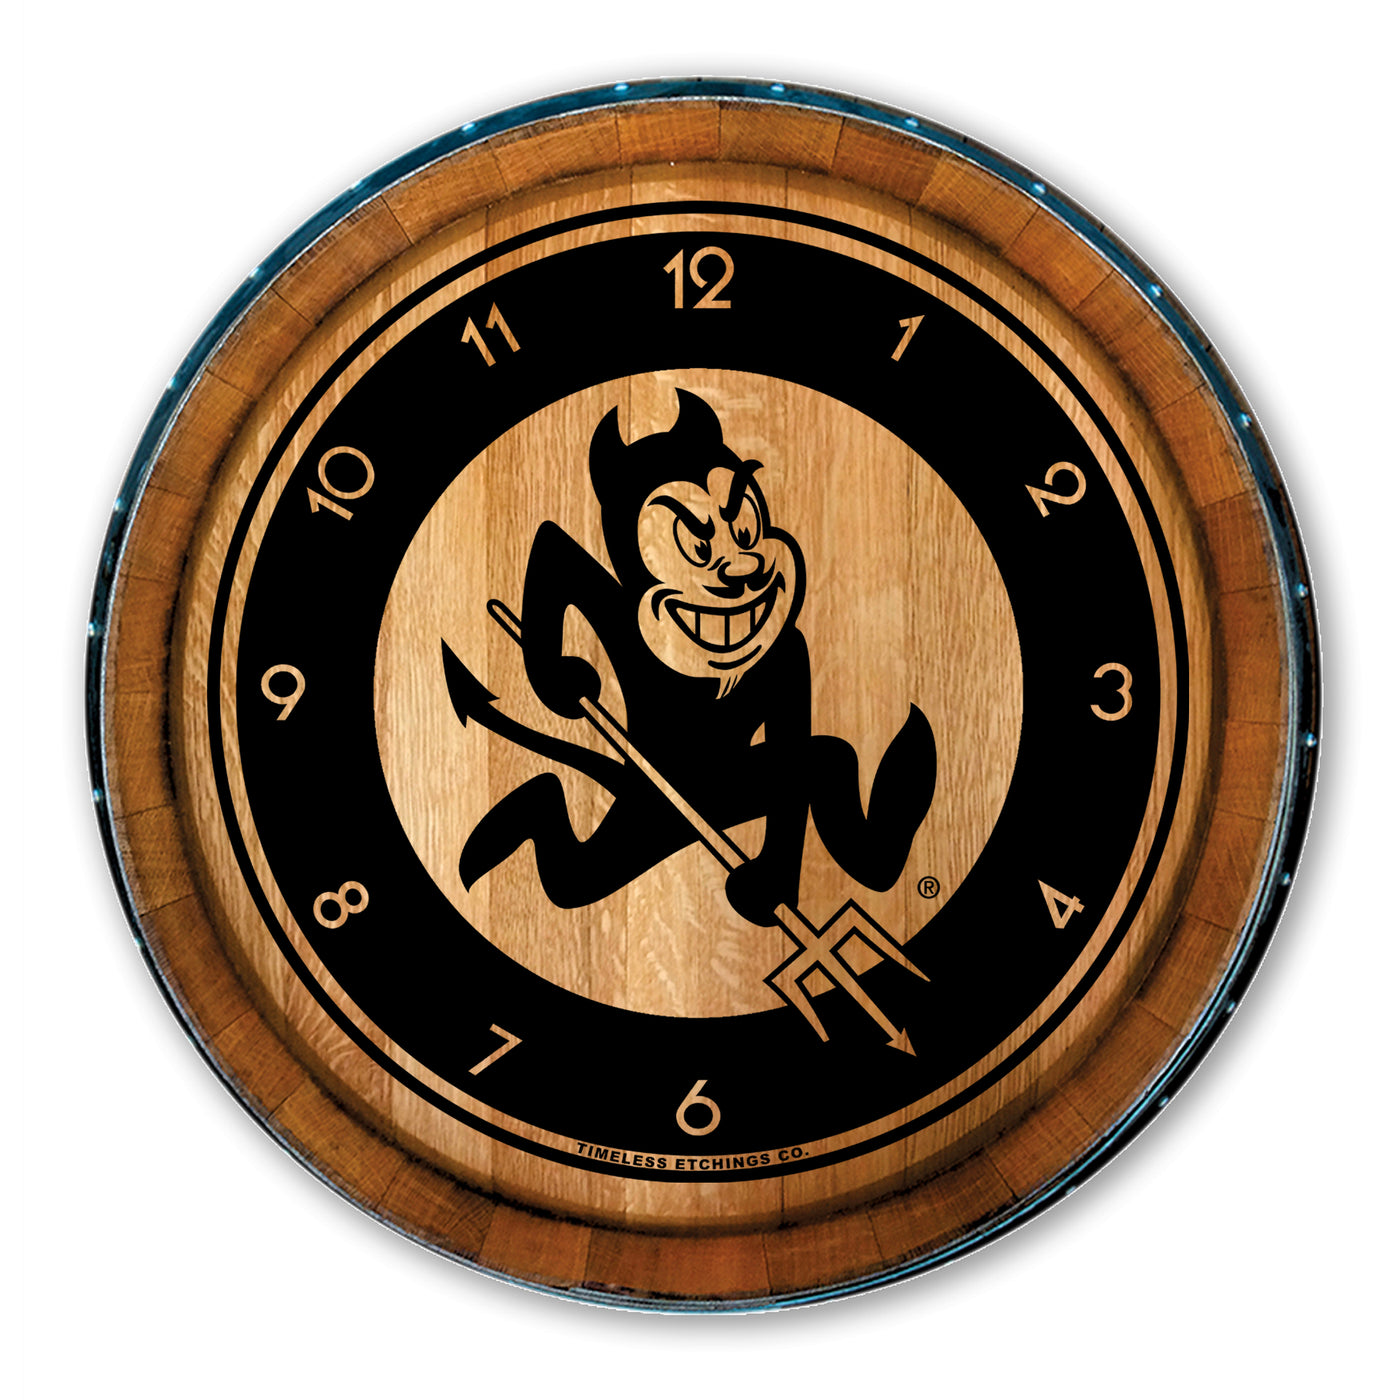 ASU wine barrel wooden clock with Sparky in the middle and numbers 1-4 and 6-12 surrounding